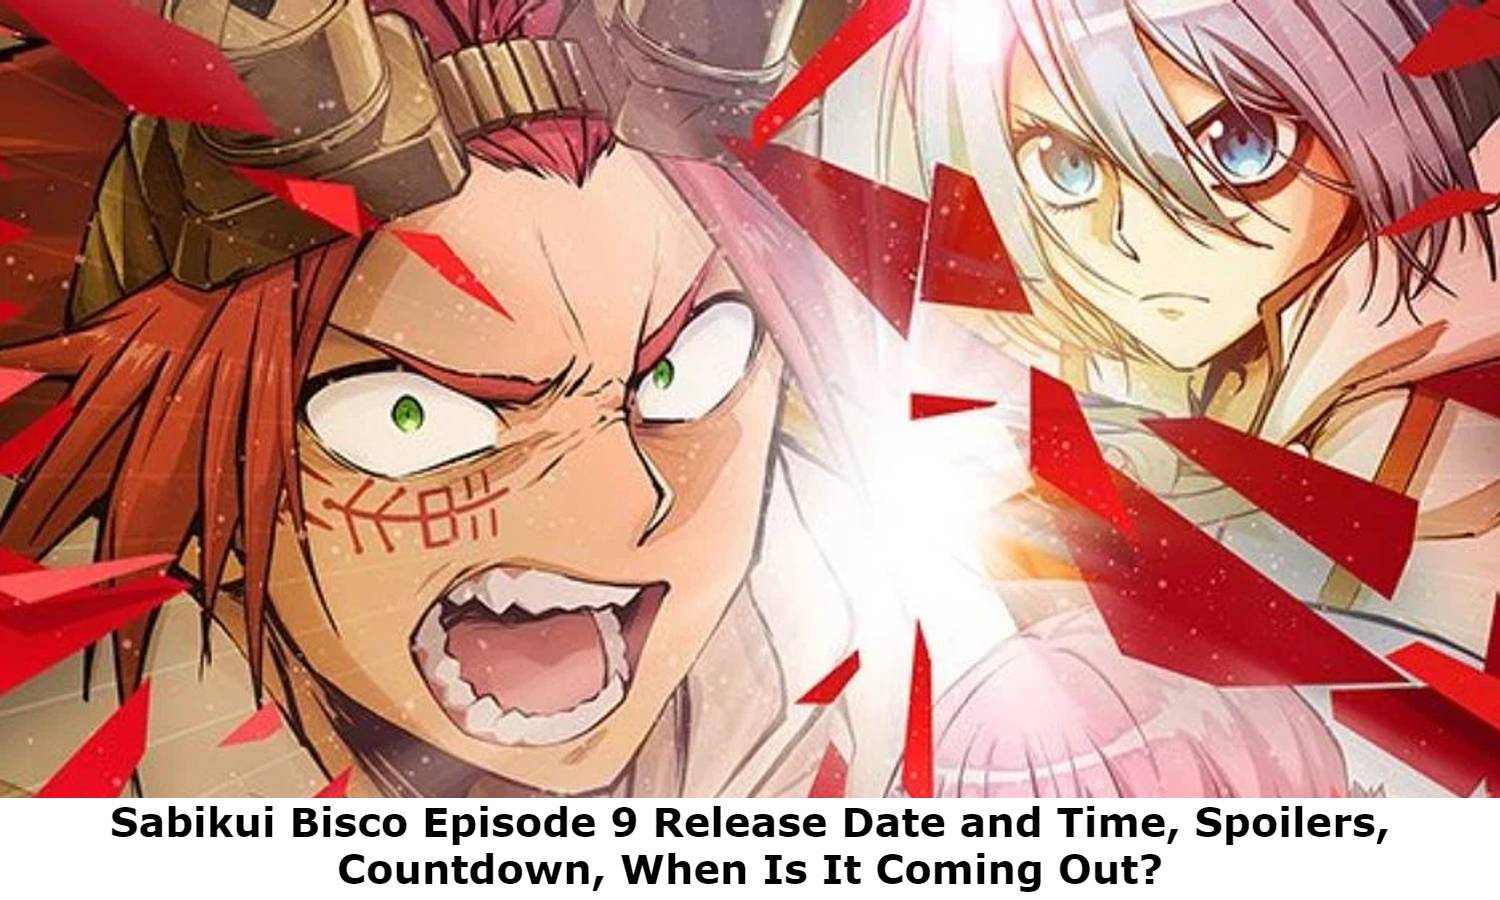 Sabikui Bisco Episode 9 Release Date and Time, Spoilers, Countdown, When Is It Coming Out?